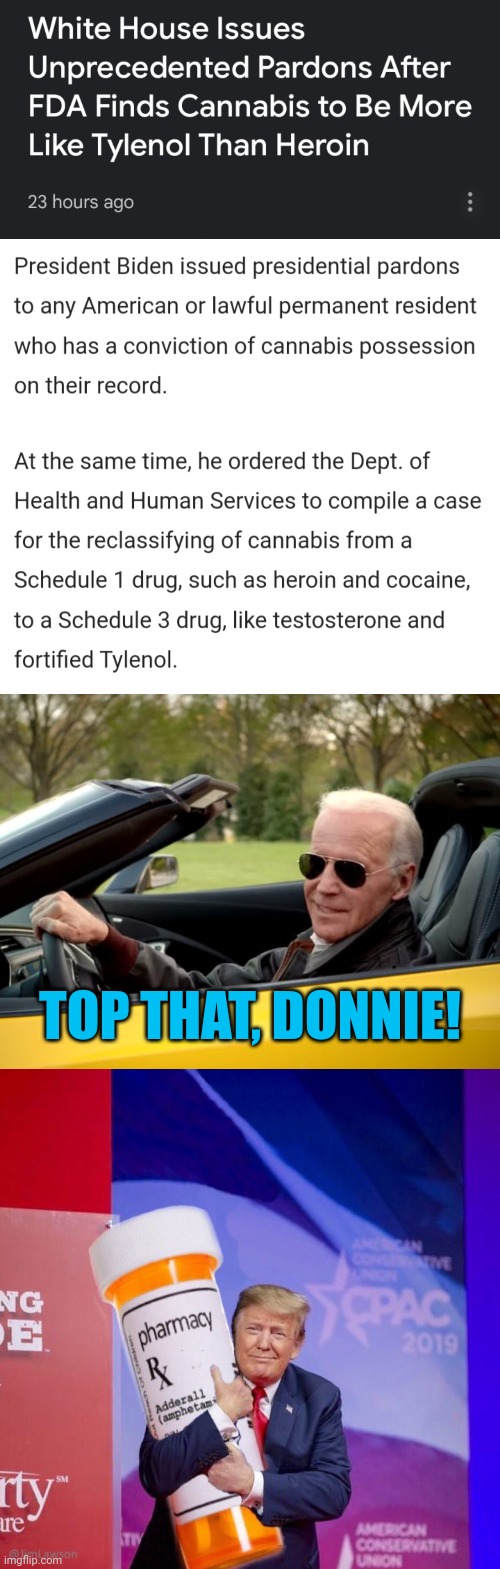 Legalizing drugs vs. being on drugs | TOP THAT, DONNIE! | image tagged in joe biden get in,addy addict trump,cannabis,pardons,history being made | made w/ Imgflip meme maker